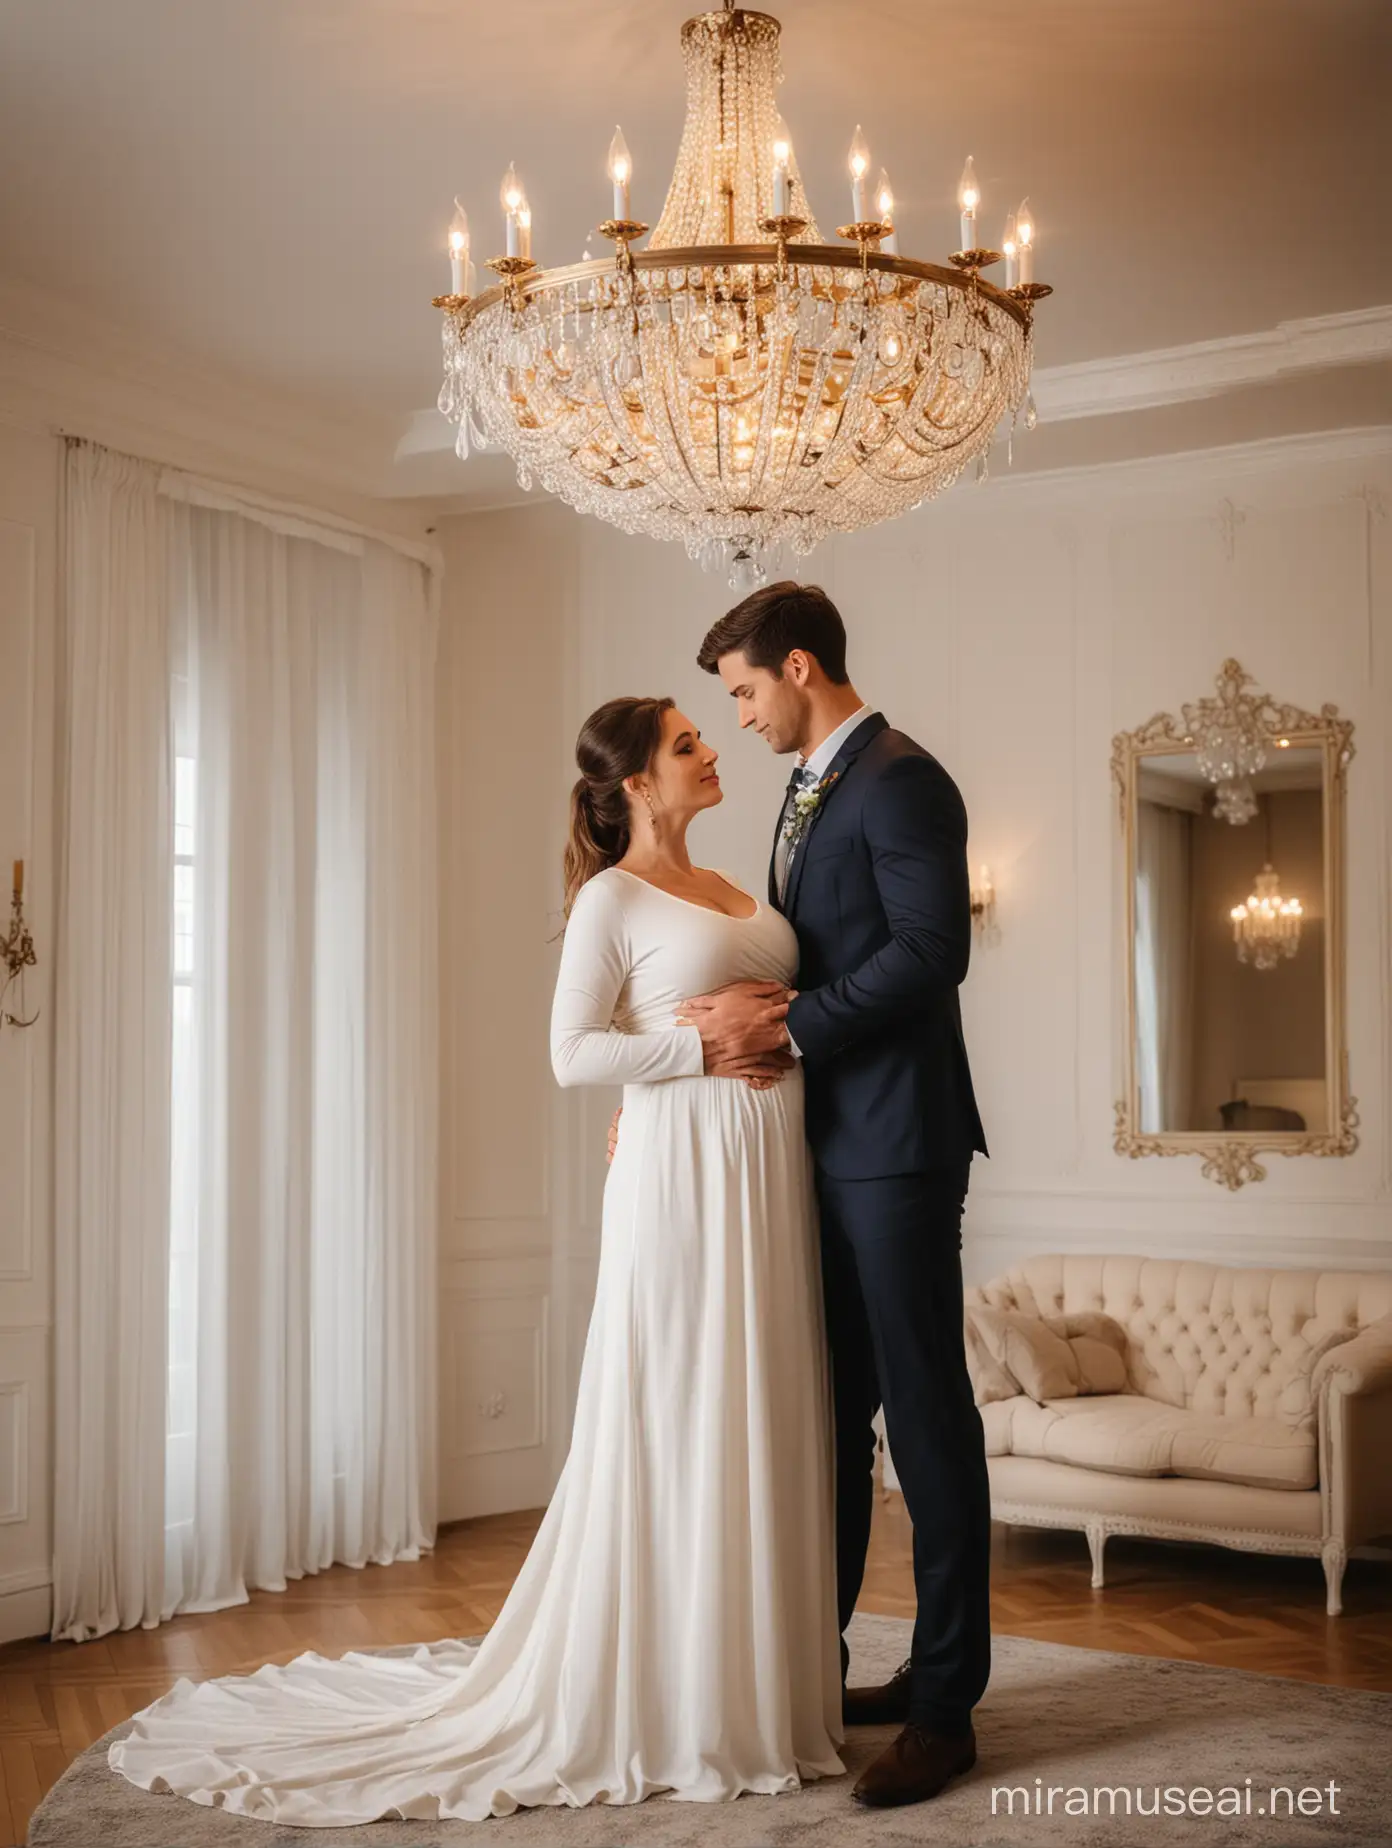 Romantic Moment Pregnant Nanny Embraced by Handsome Man under Luminous Chandelier